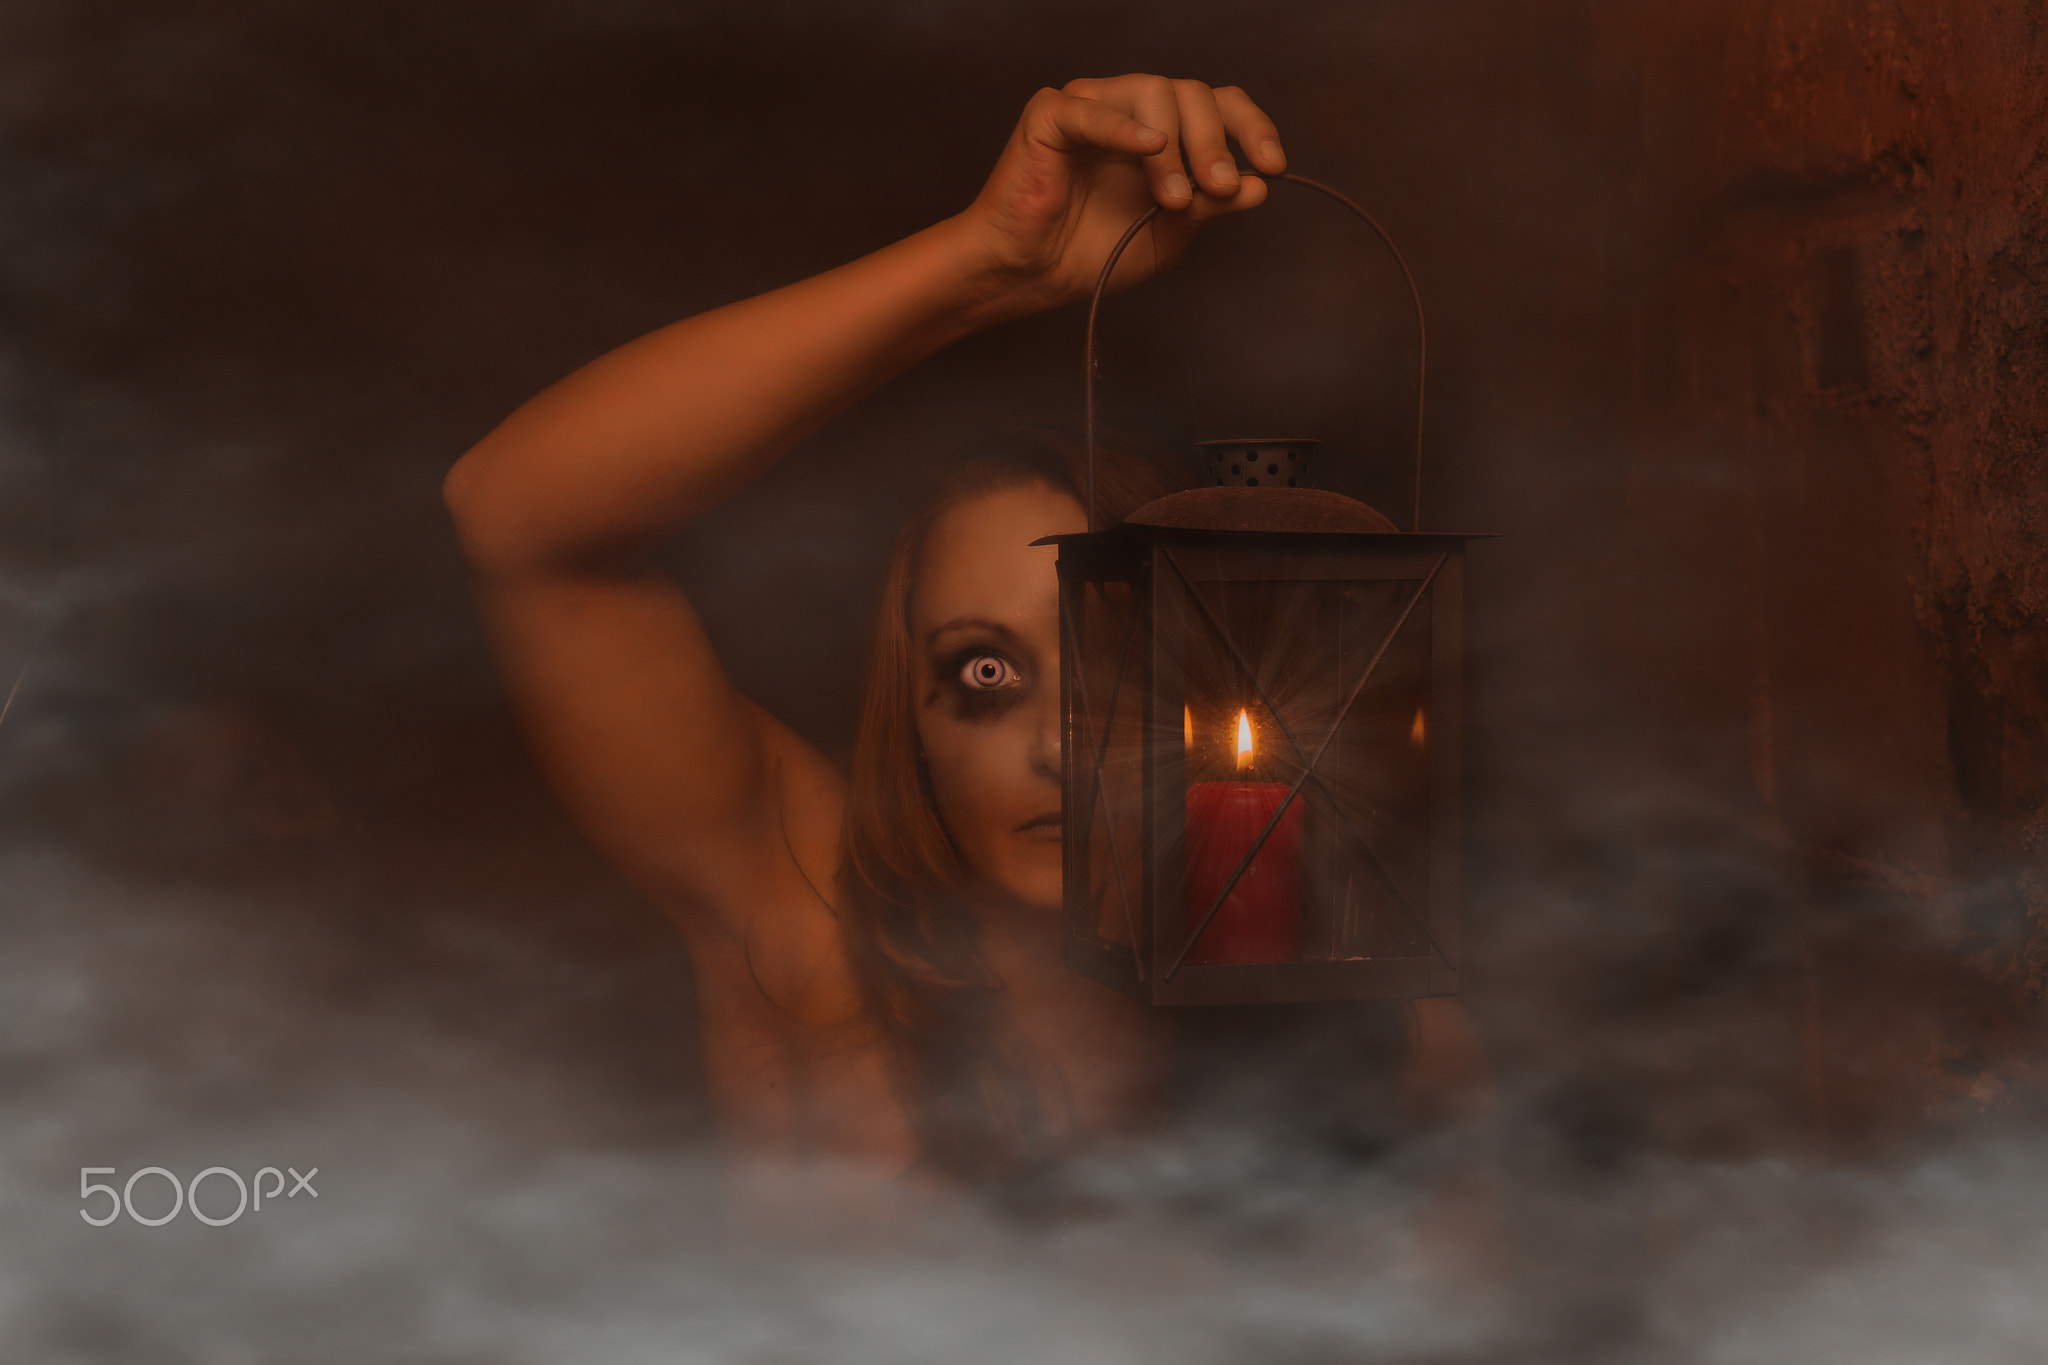 People 2048x1365 Niko Angelopoulos women lantern horror arms up smoke scary face watermarked 500px low light